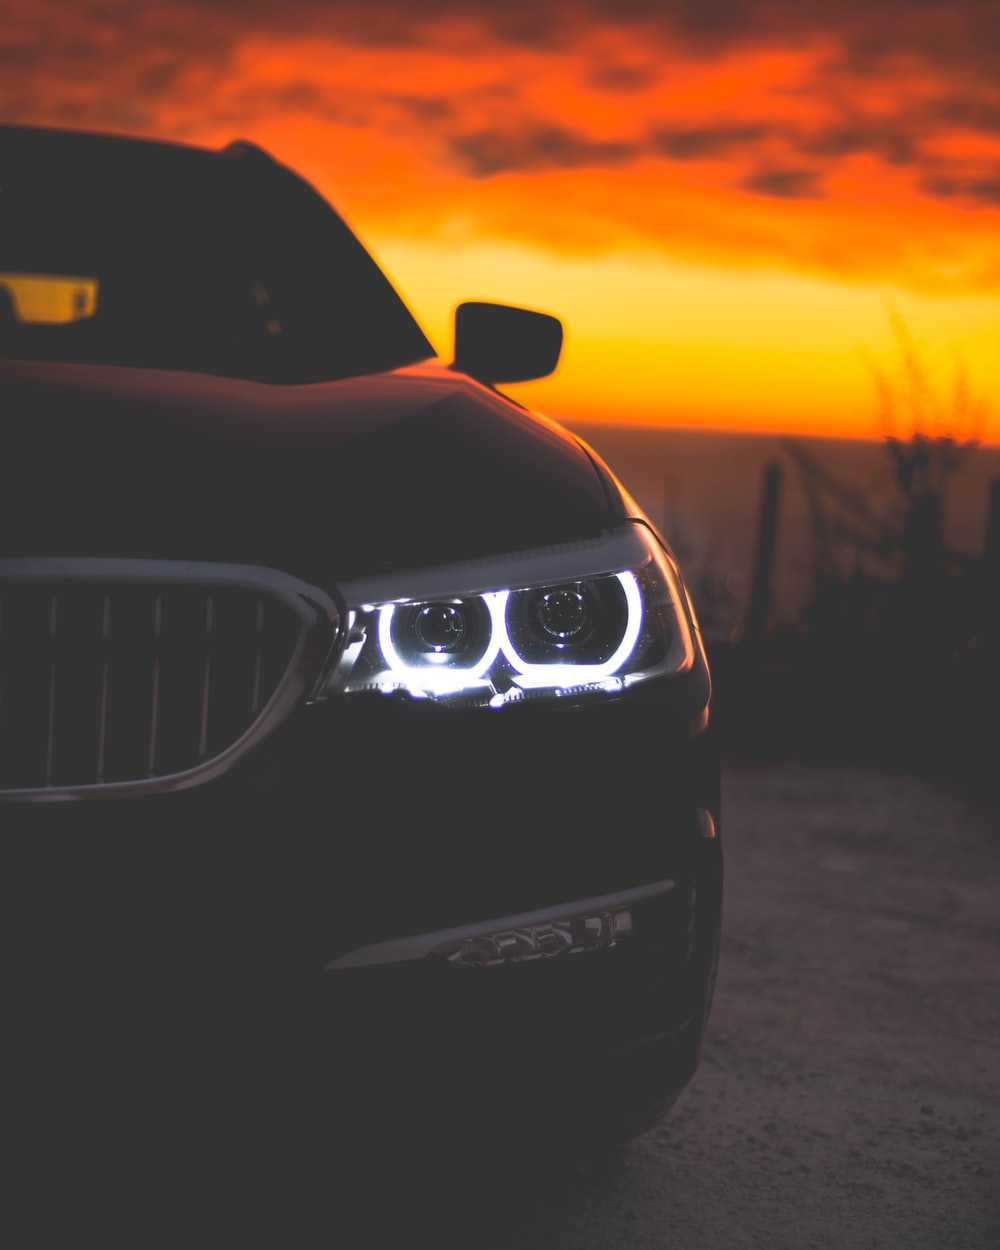 Bmw X1 Picture. Download Free Image